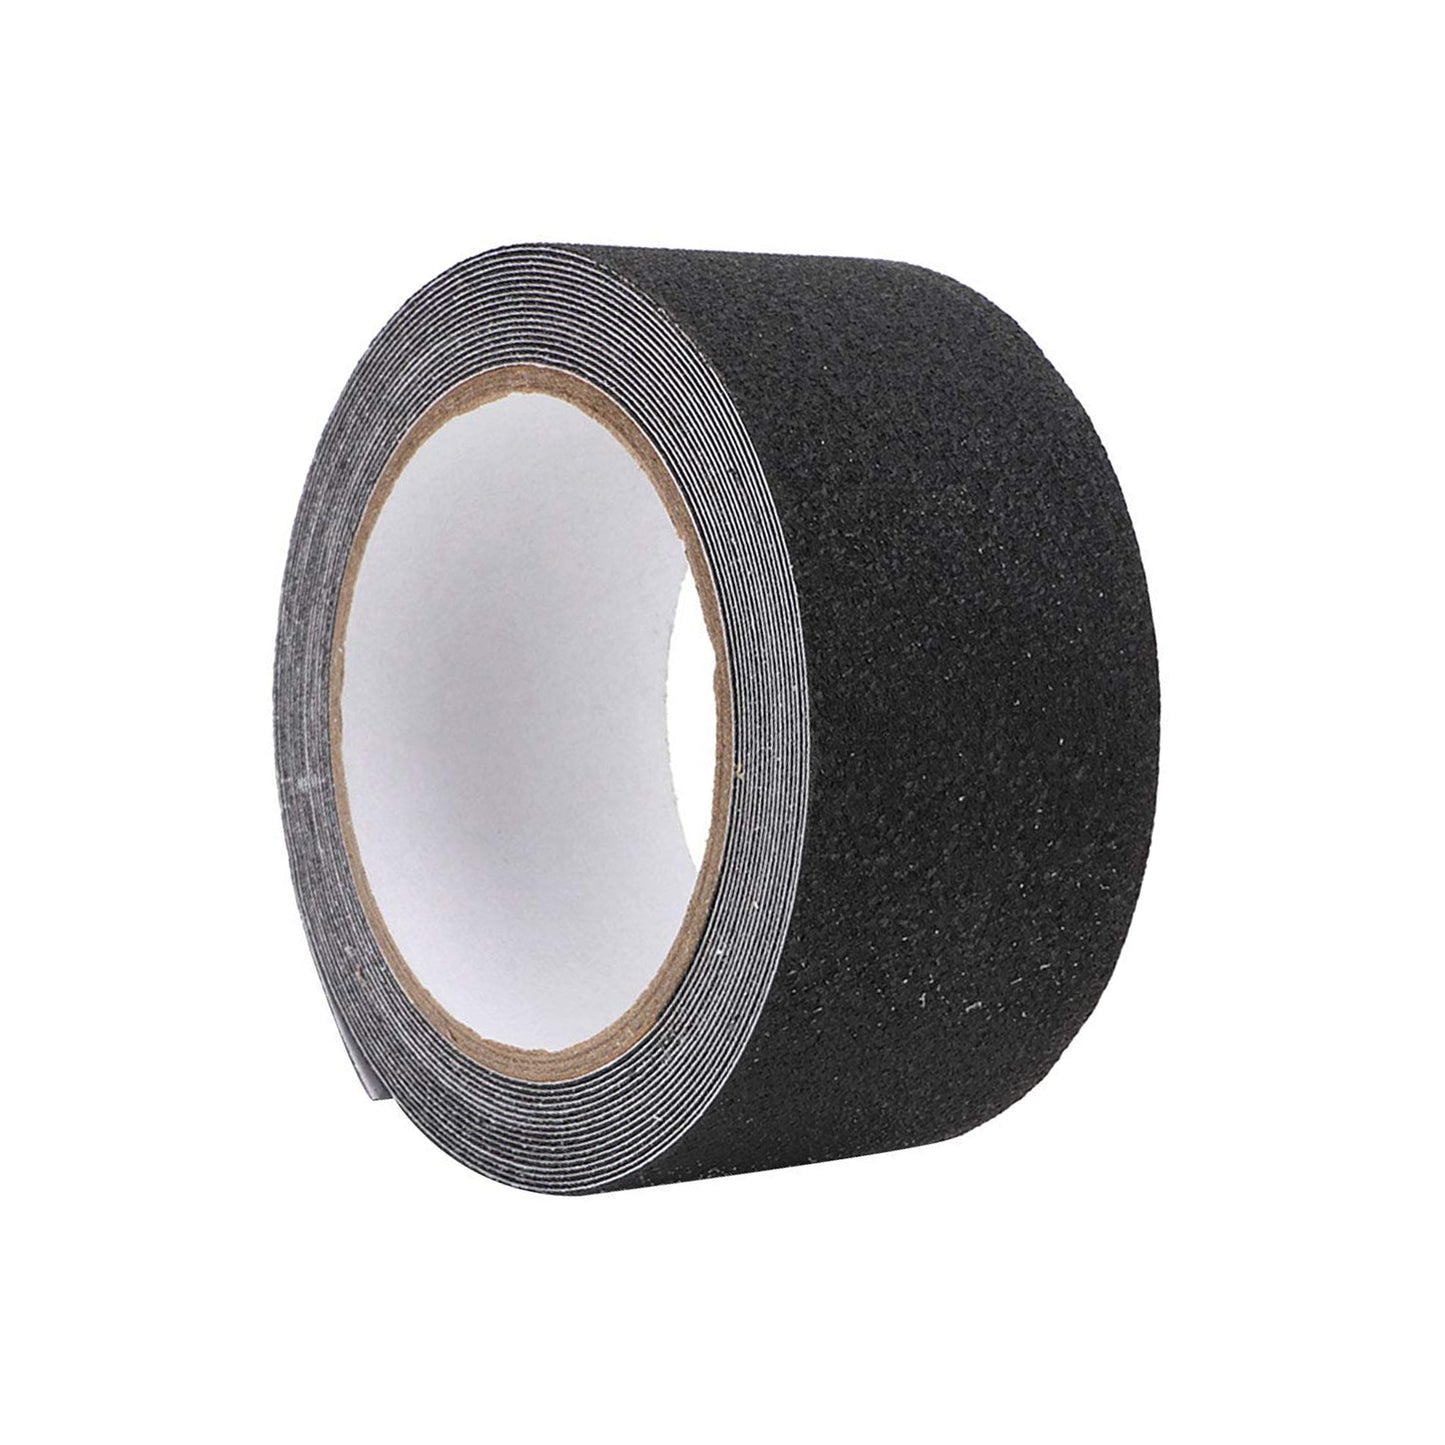 Black Cloth Grip Tape High Traction Waterproof Roll 